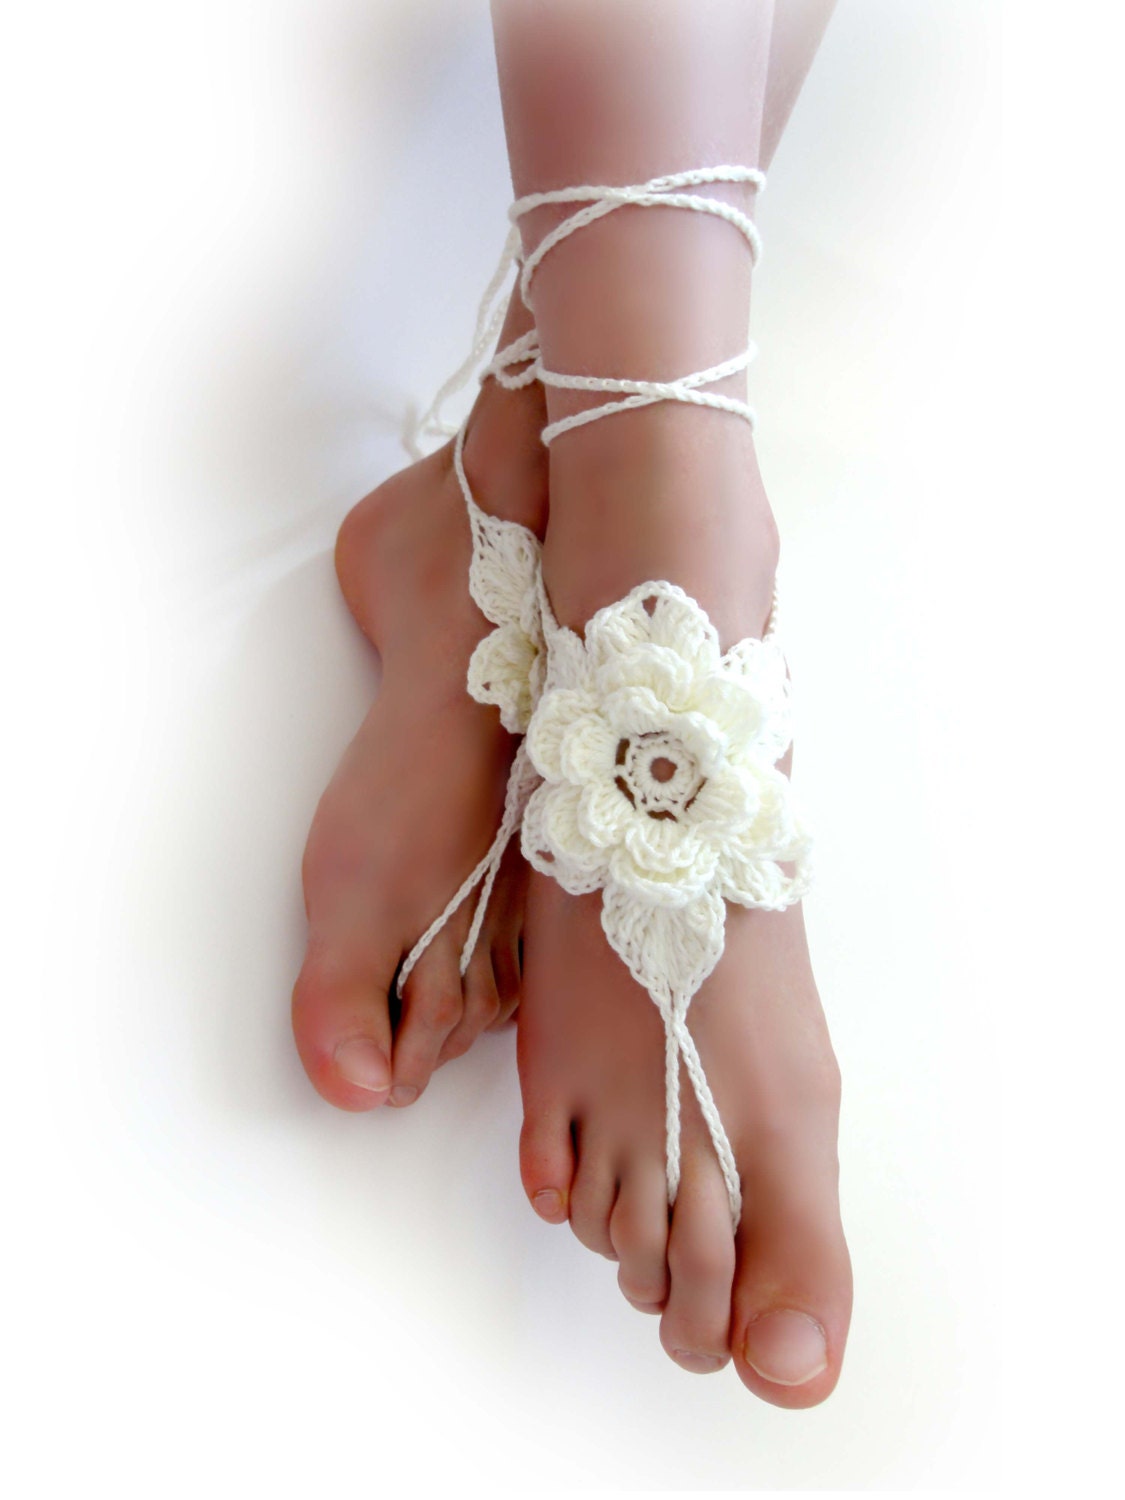 Butterfly Mint Crochet Barefoot Sandals, Nude Shoes, Bridal Foot Jewelry,  Fairytale Wedding Accessory - Etsy | Bare foot sandals, Crochet barefoot  sandals, Bridal foot jewelry